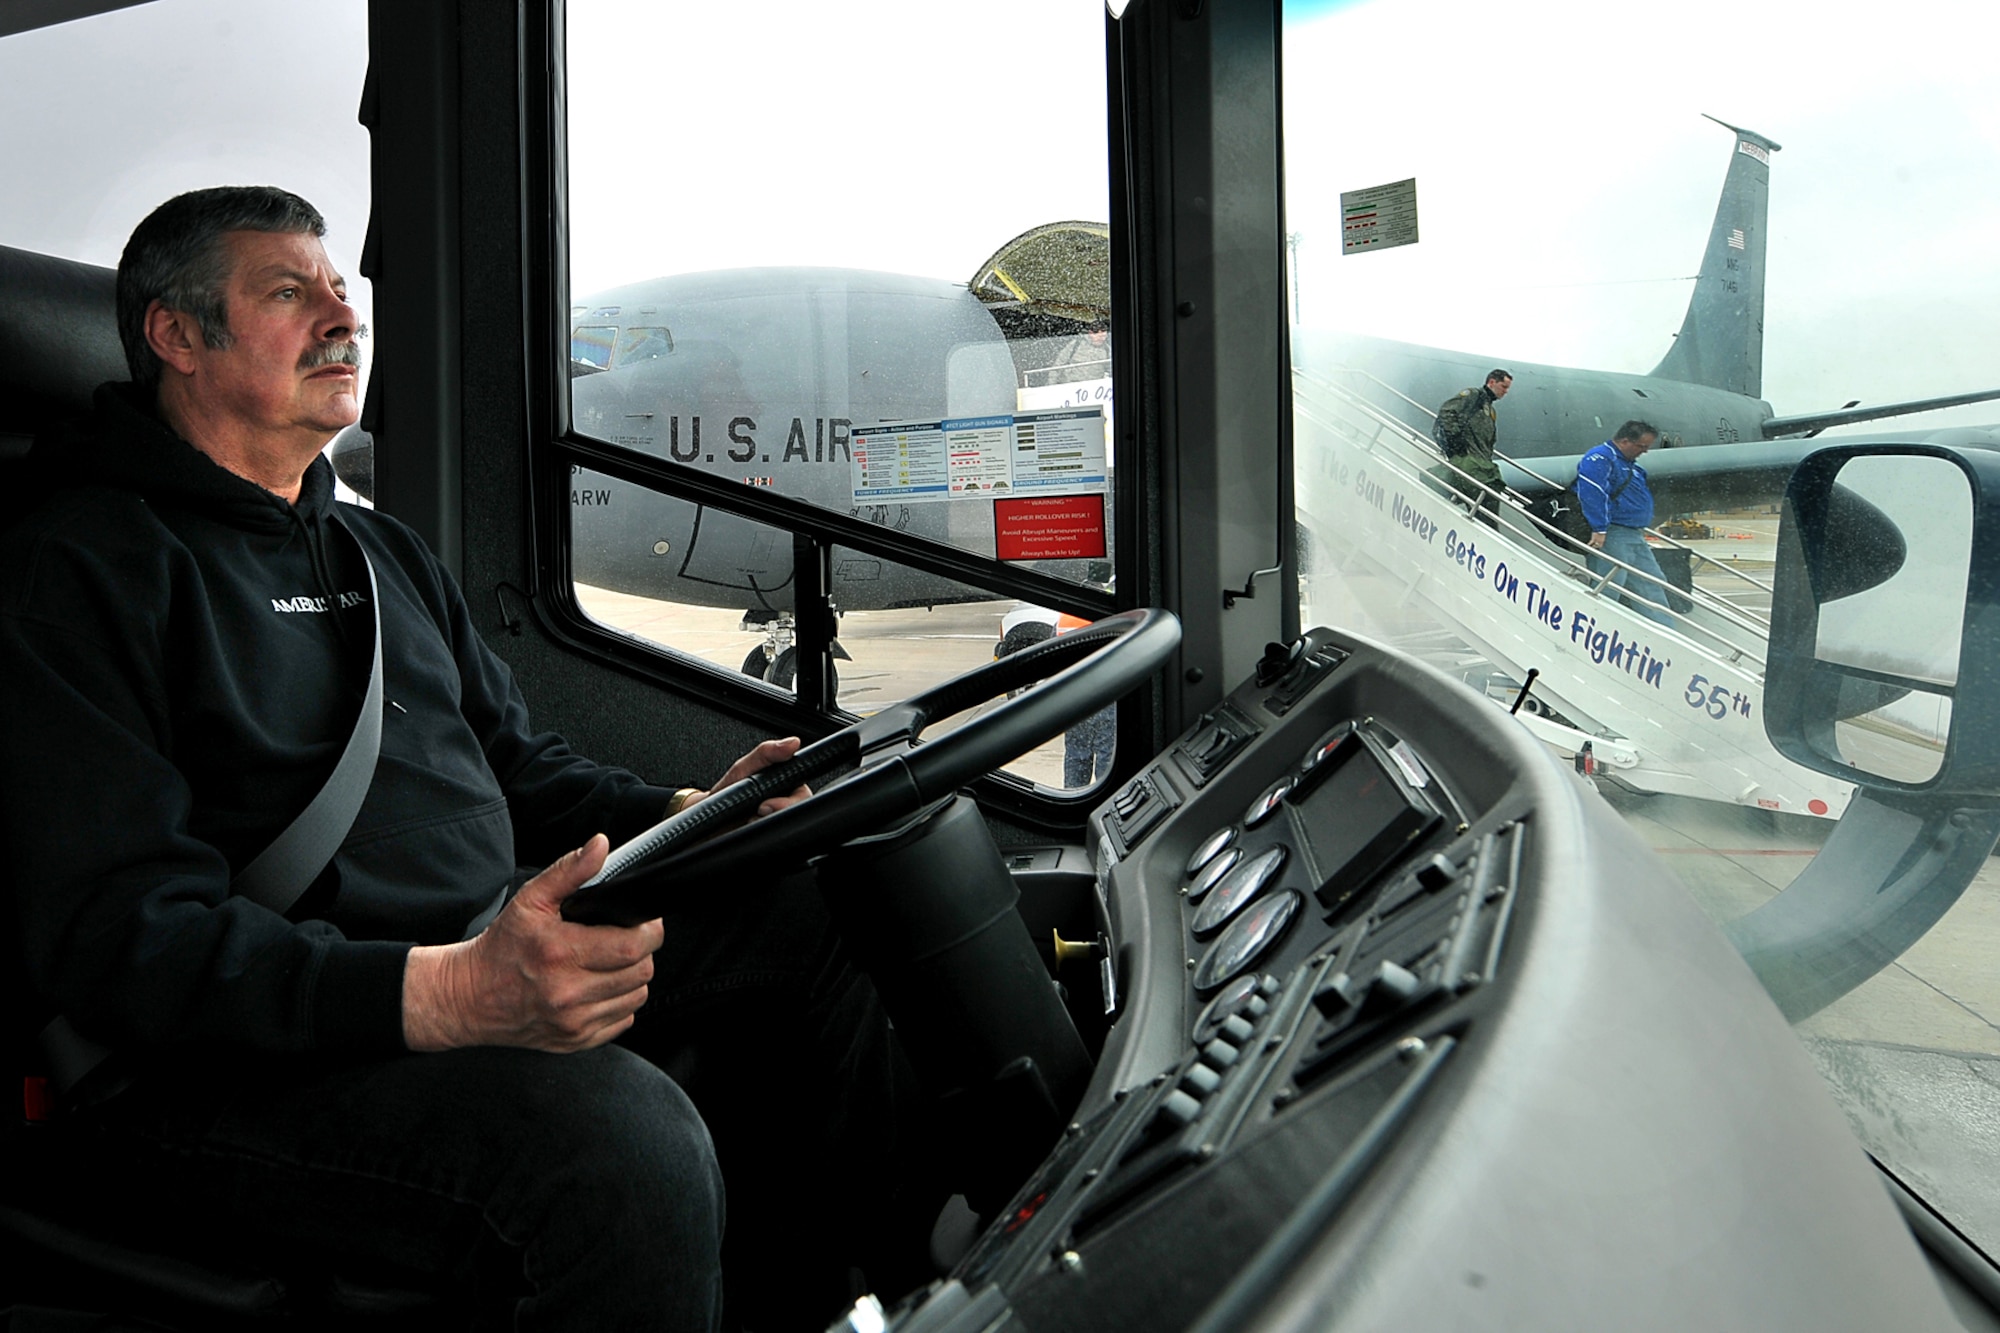 OFFUTT AIR FORCE BASE, Neb. -- Dan McDermott, a driver with the 55th Mission Support Group's Logistics Support Division, waits for members of U.S. Strategic Command to board a bus after landing at Offutt aboard a KC-135 March 19. The division's vehicle operations section takes care of Offutt's transportation needs using a fleet of more than 60 vehicles.  

U.S. Air Force photo by Charles Haymond